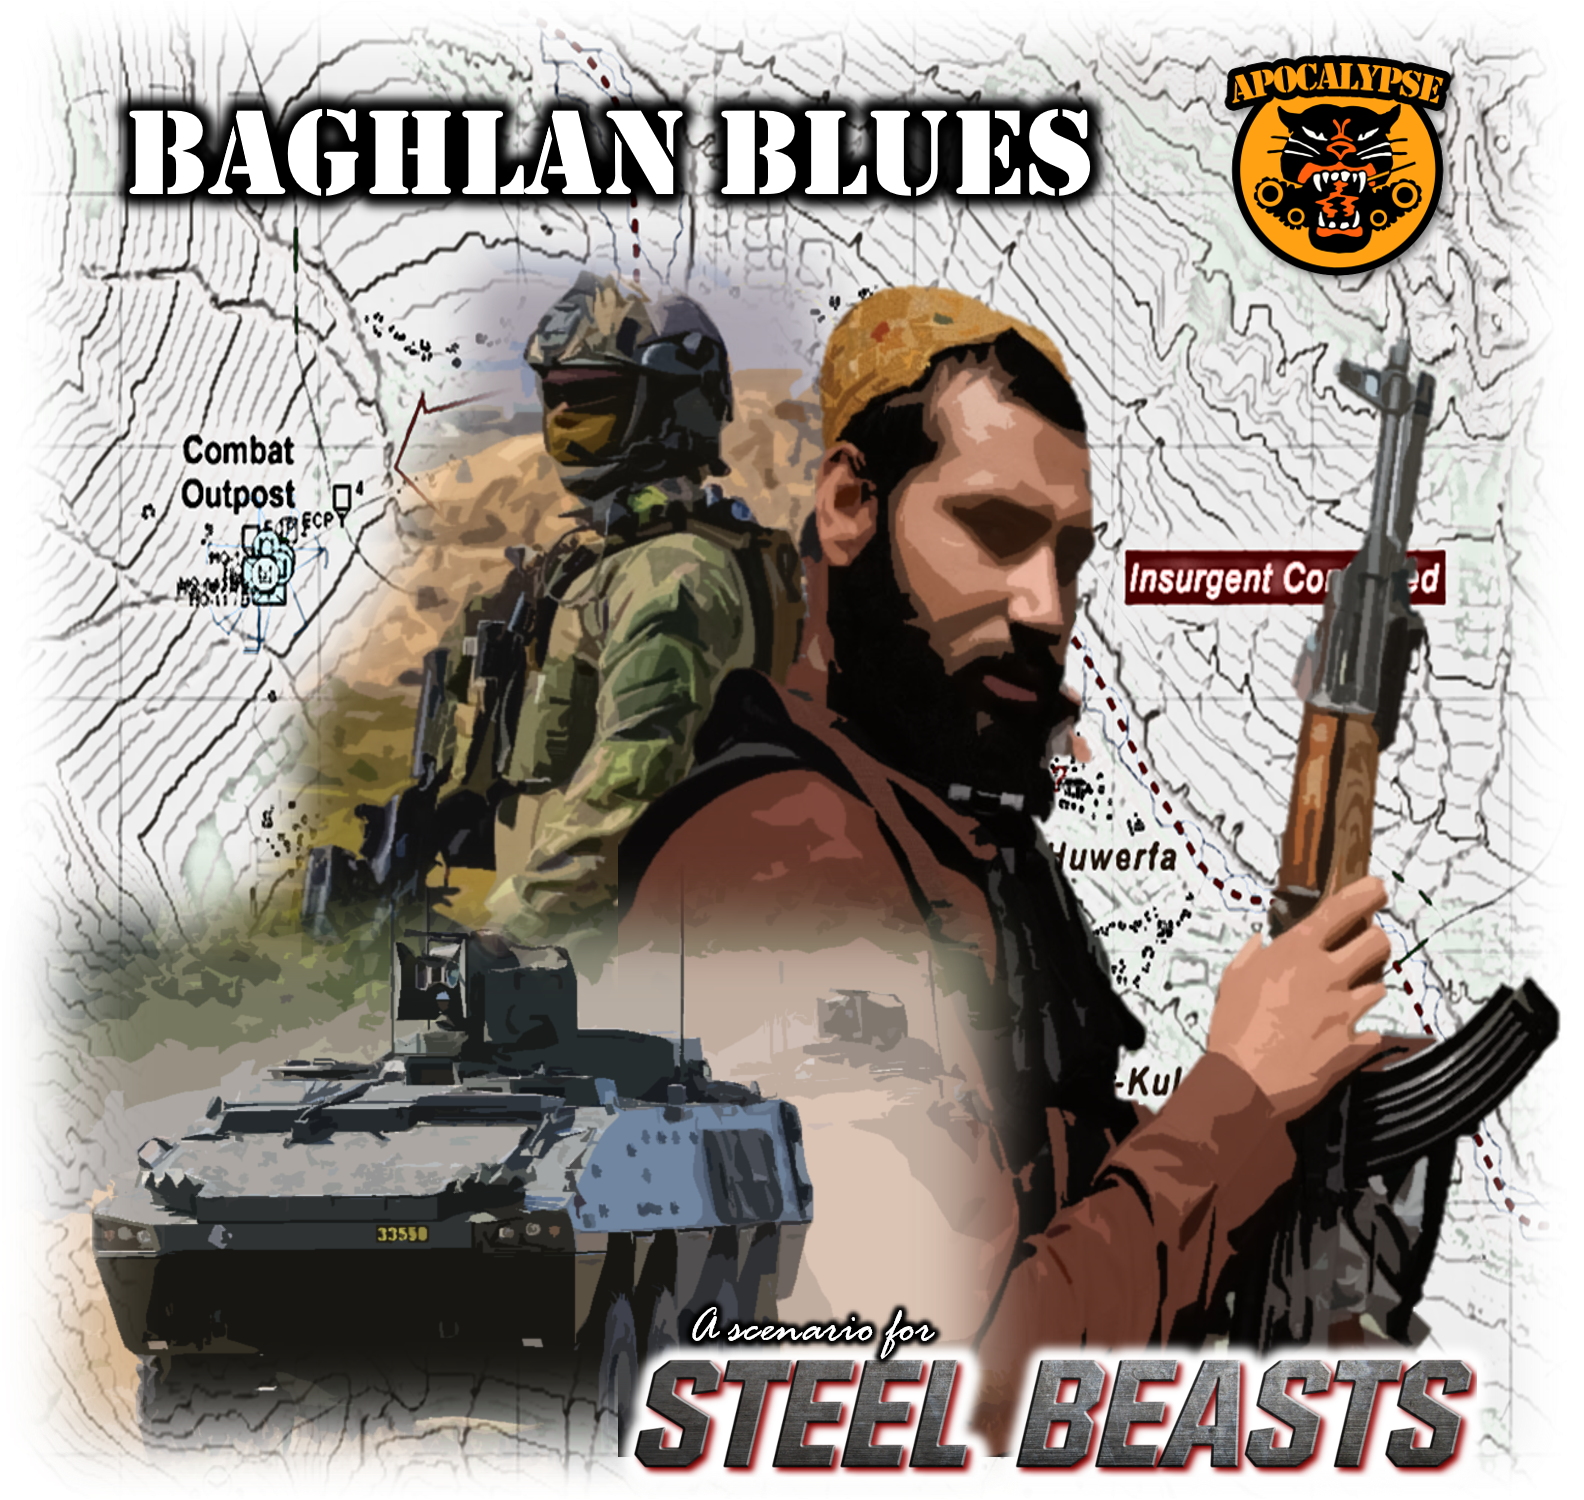 More information about "Baghlan Blues"